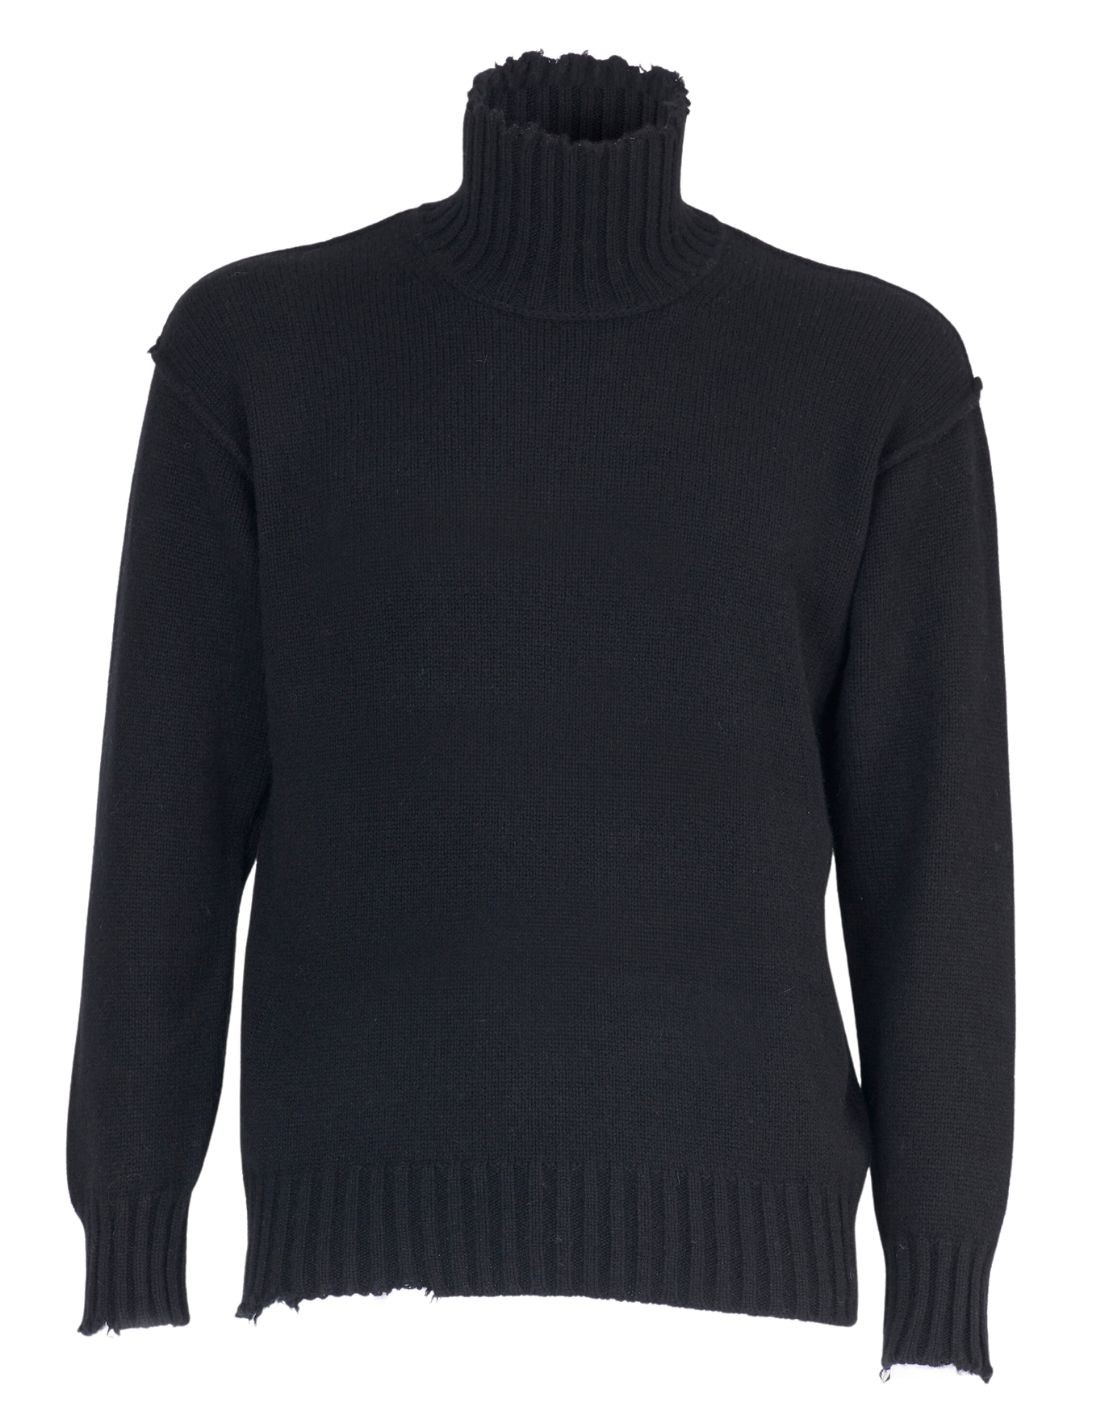 ISABEL BENENATO turtleneck sweater in black wool and cashmere - fw23